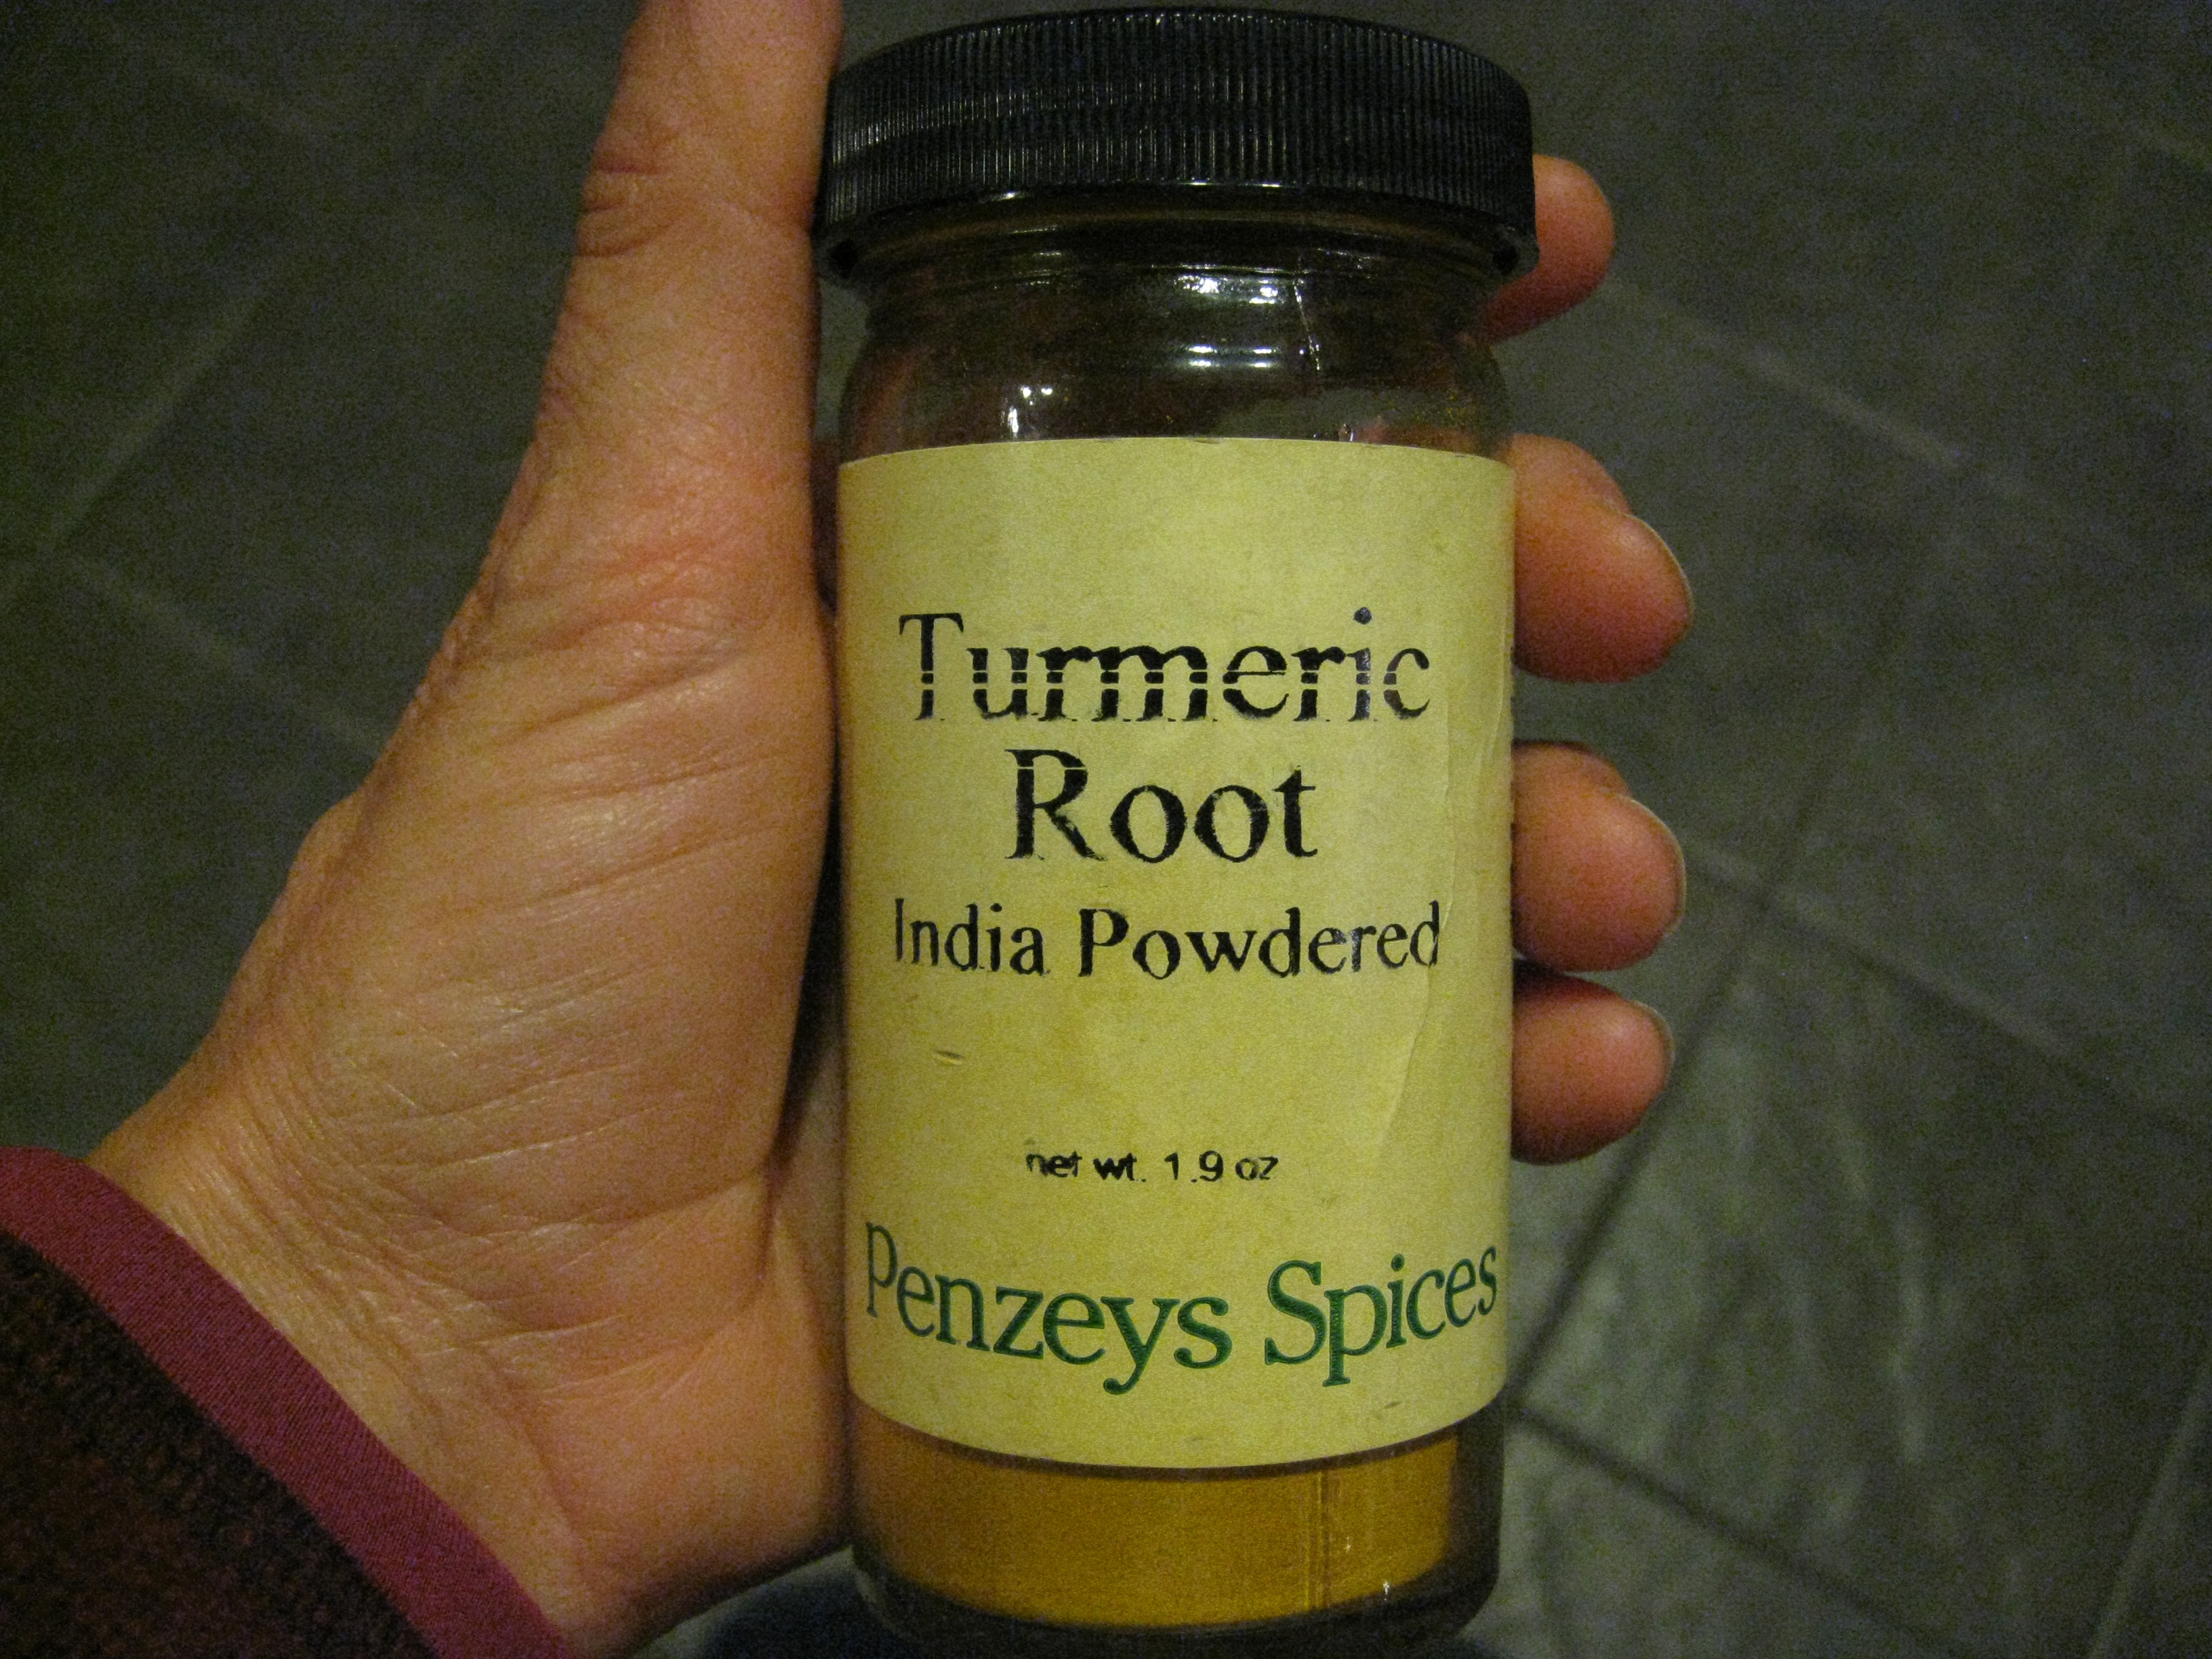 Turmeric is like ginger, dried and ground into a powder.